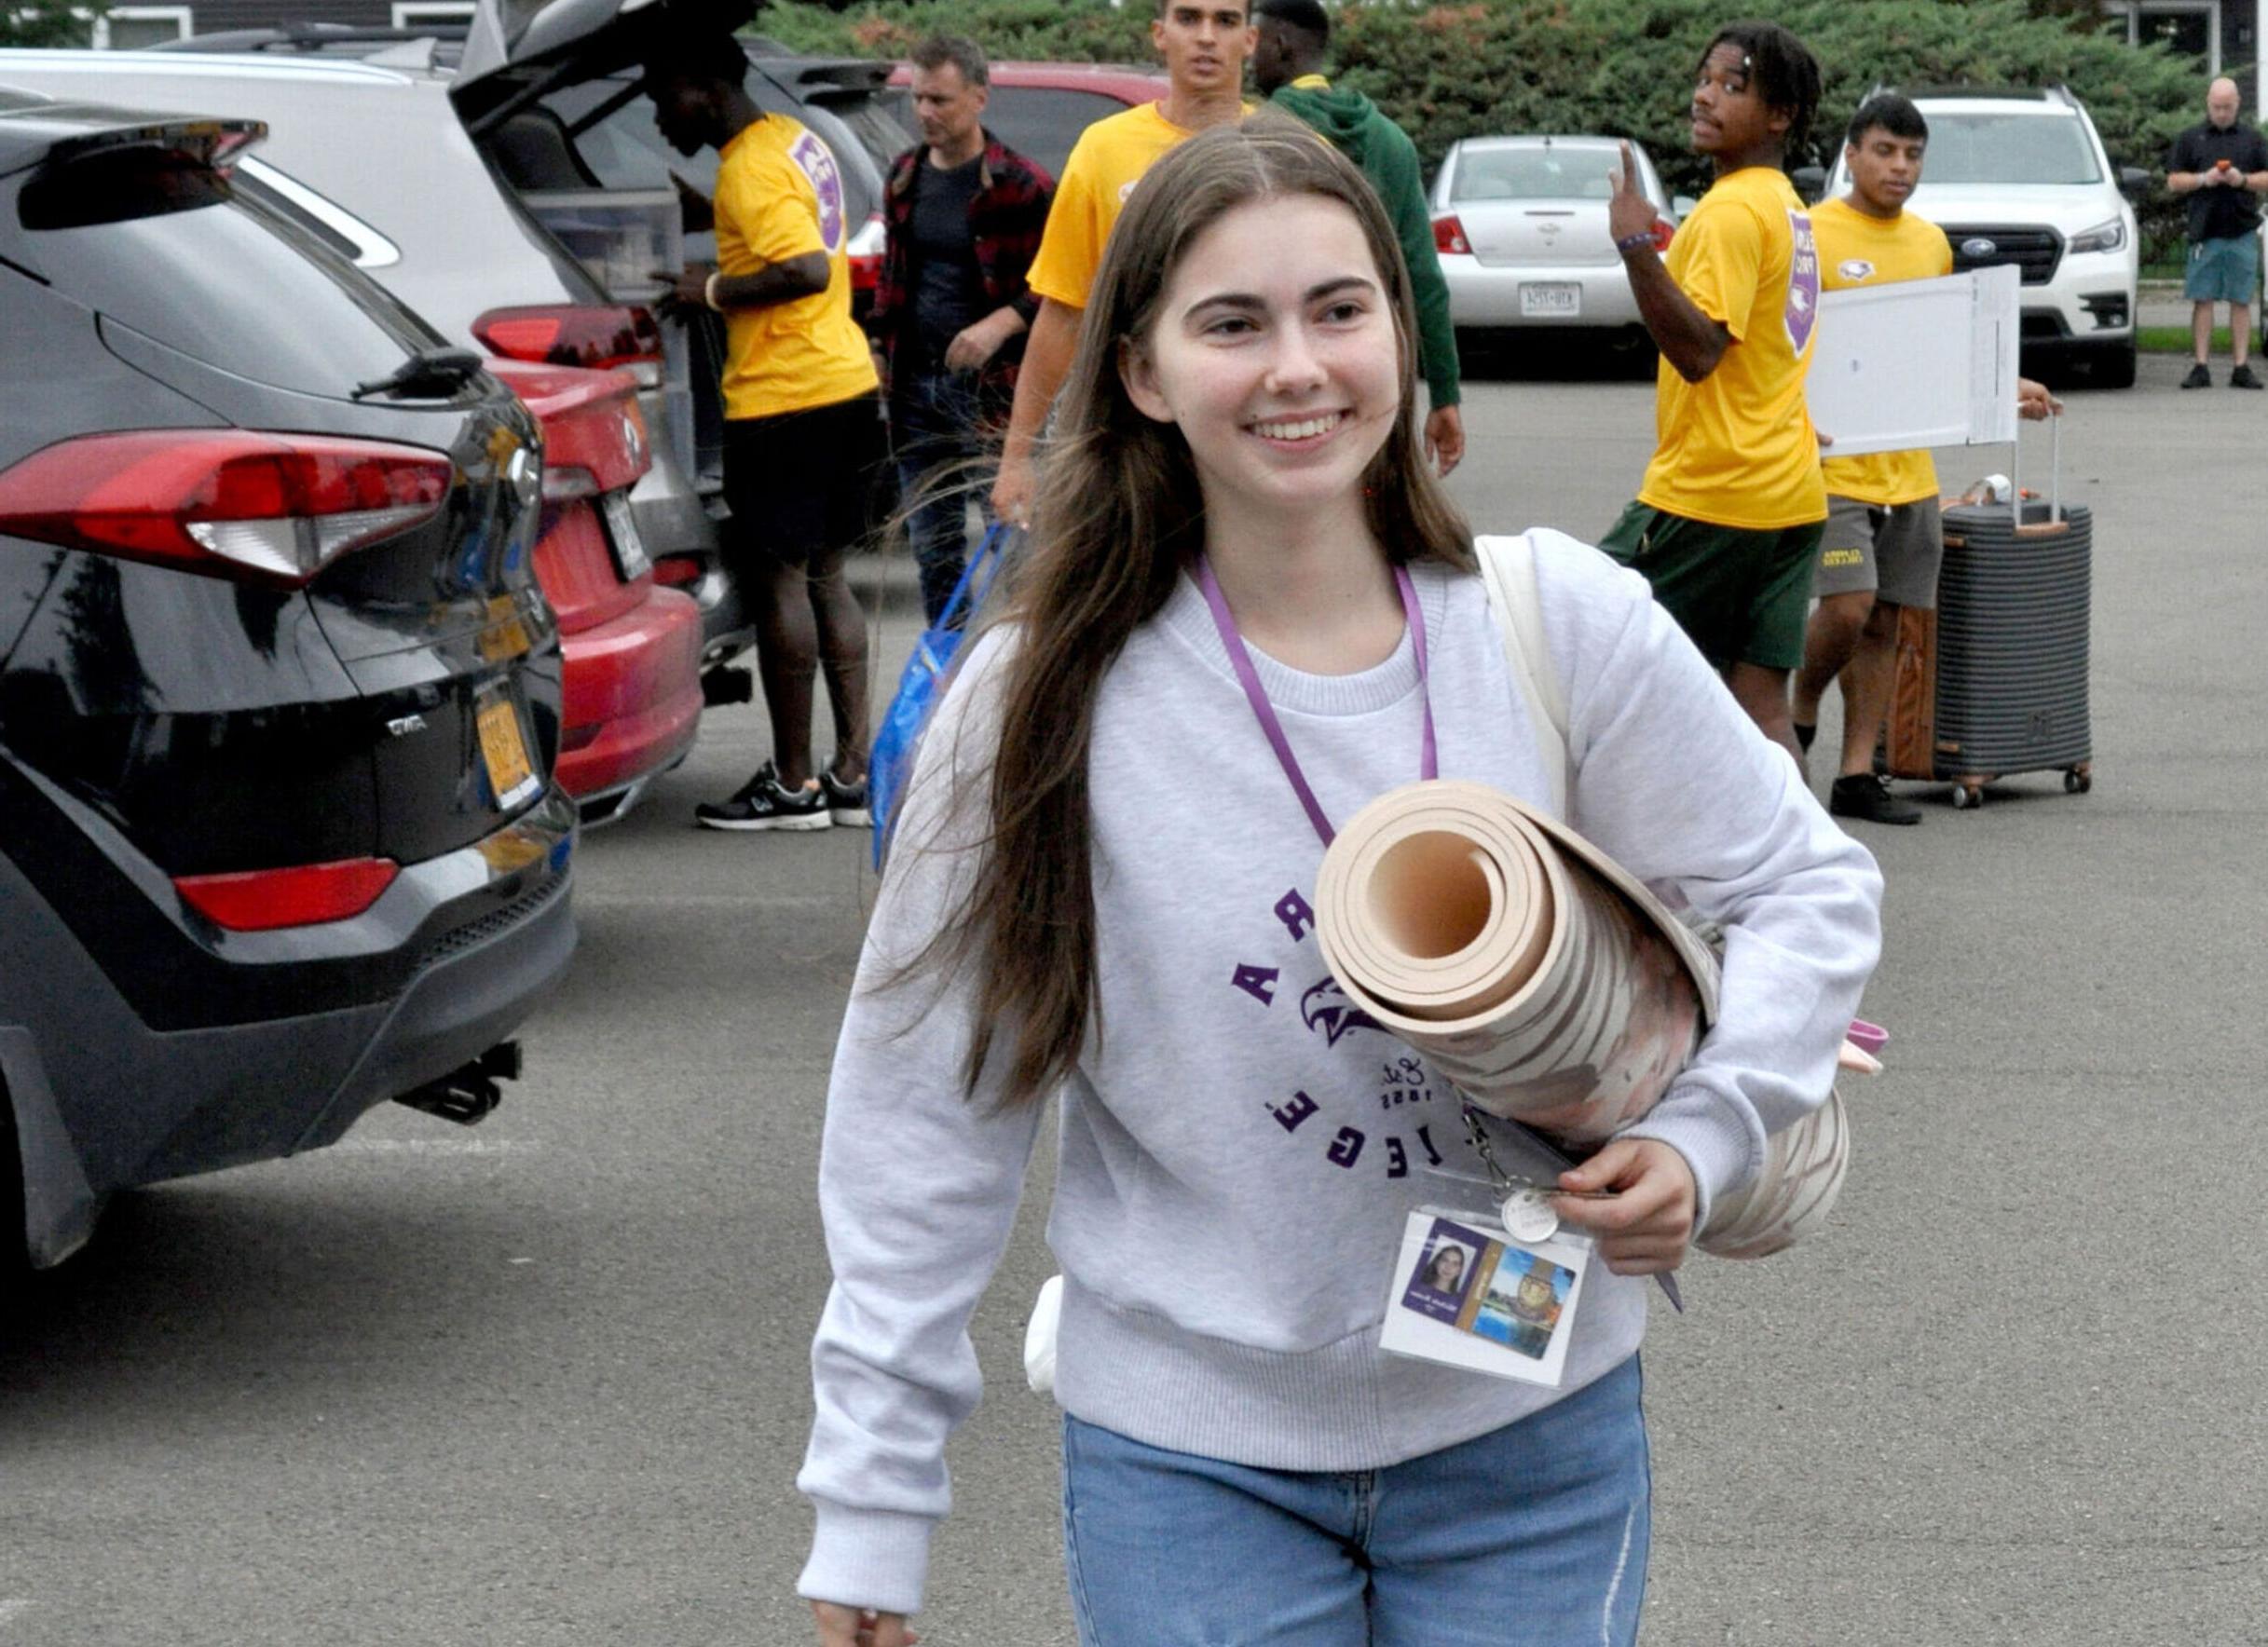 A new female student carries a rug across the parking lot during move-in day